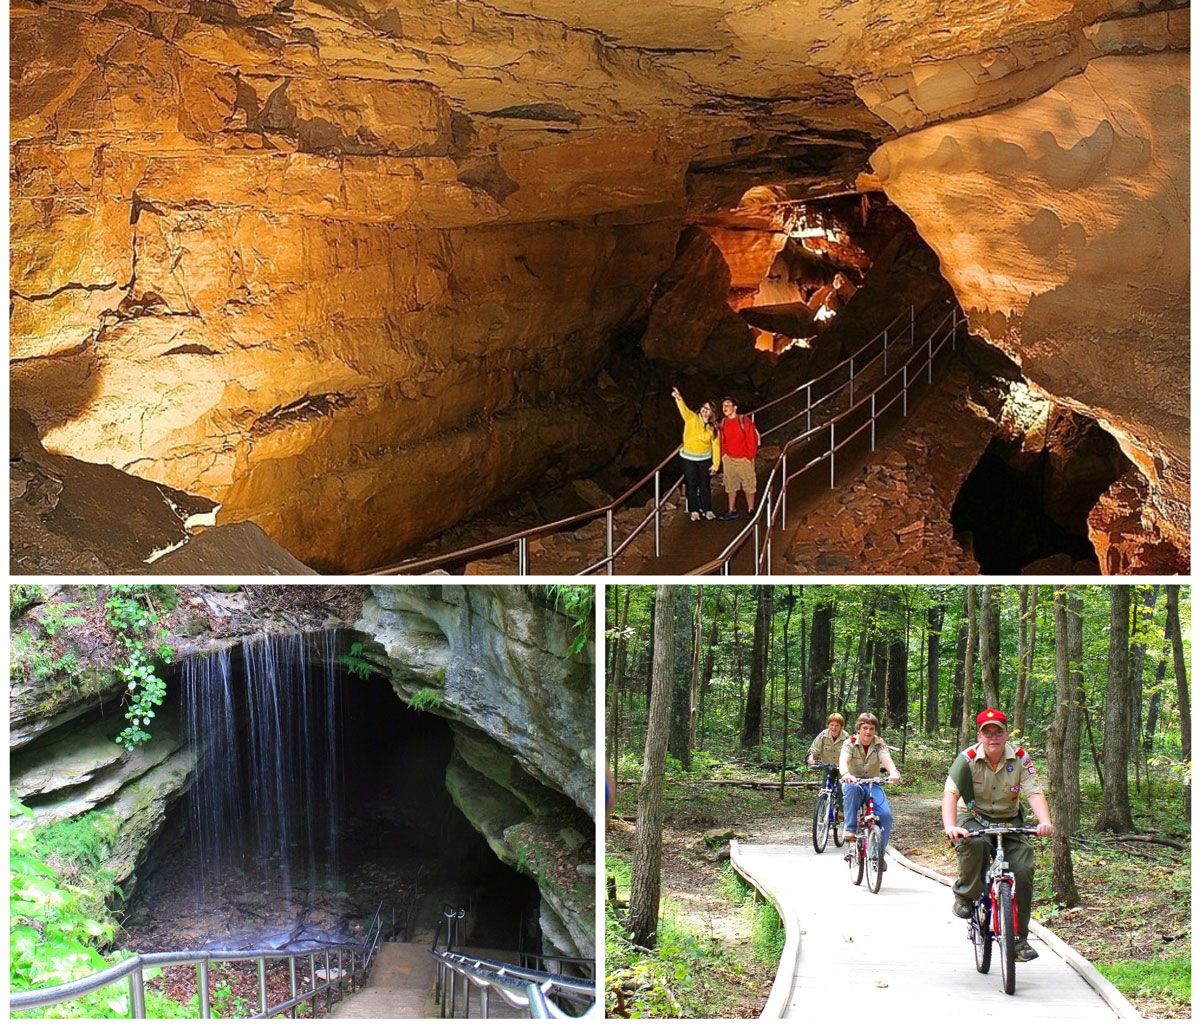 Mammoth Caves National Parks - underground cave and kids riding bikes on a trail